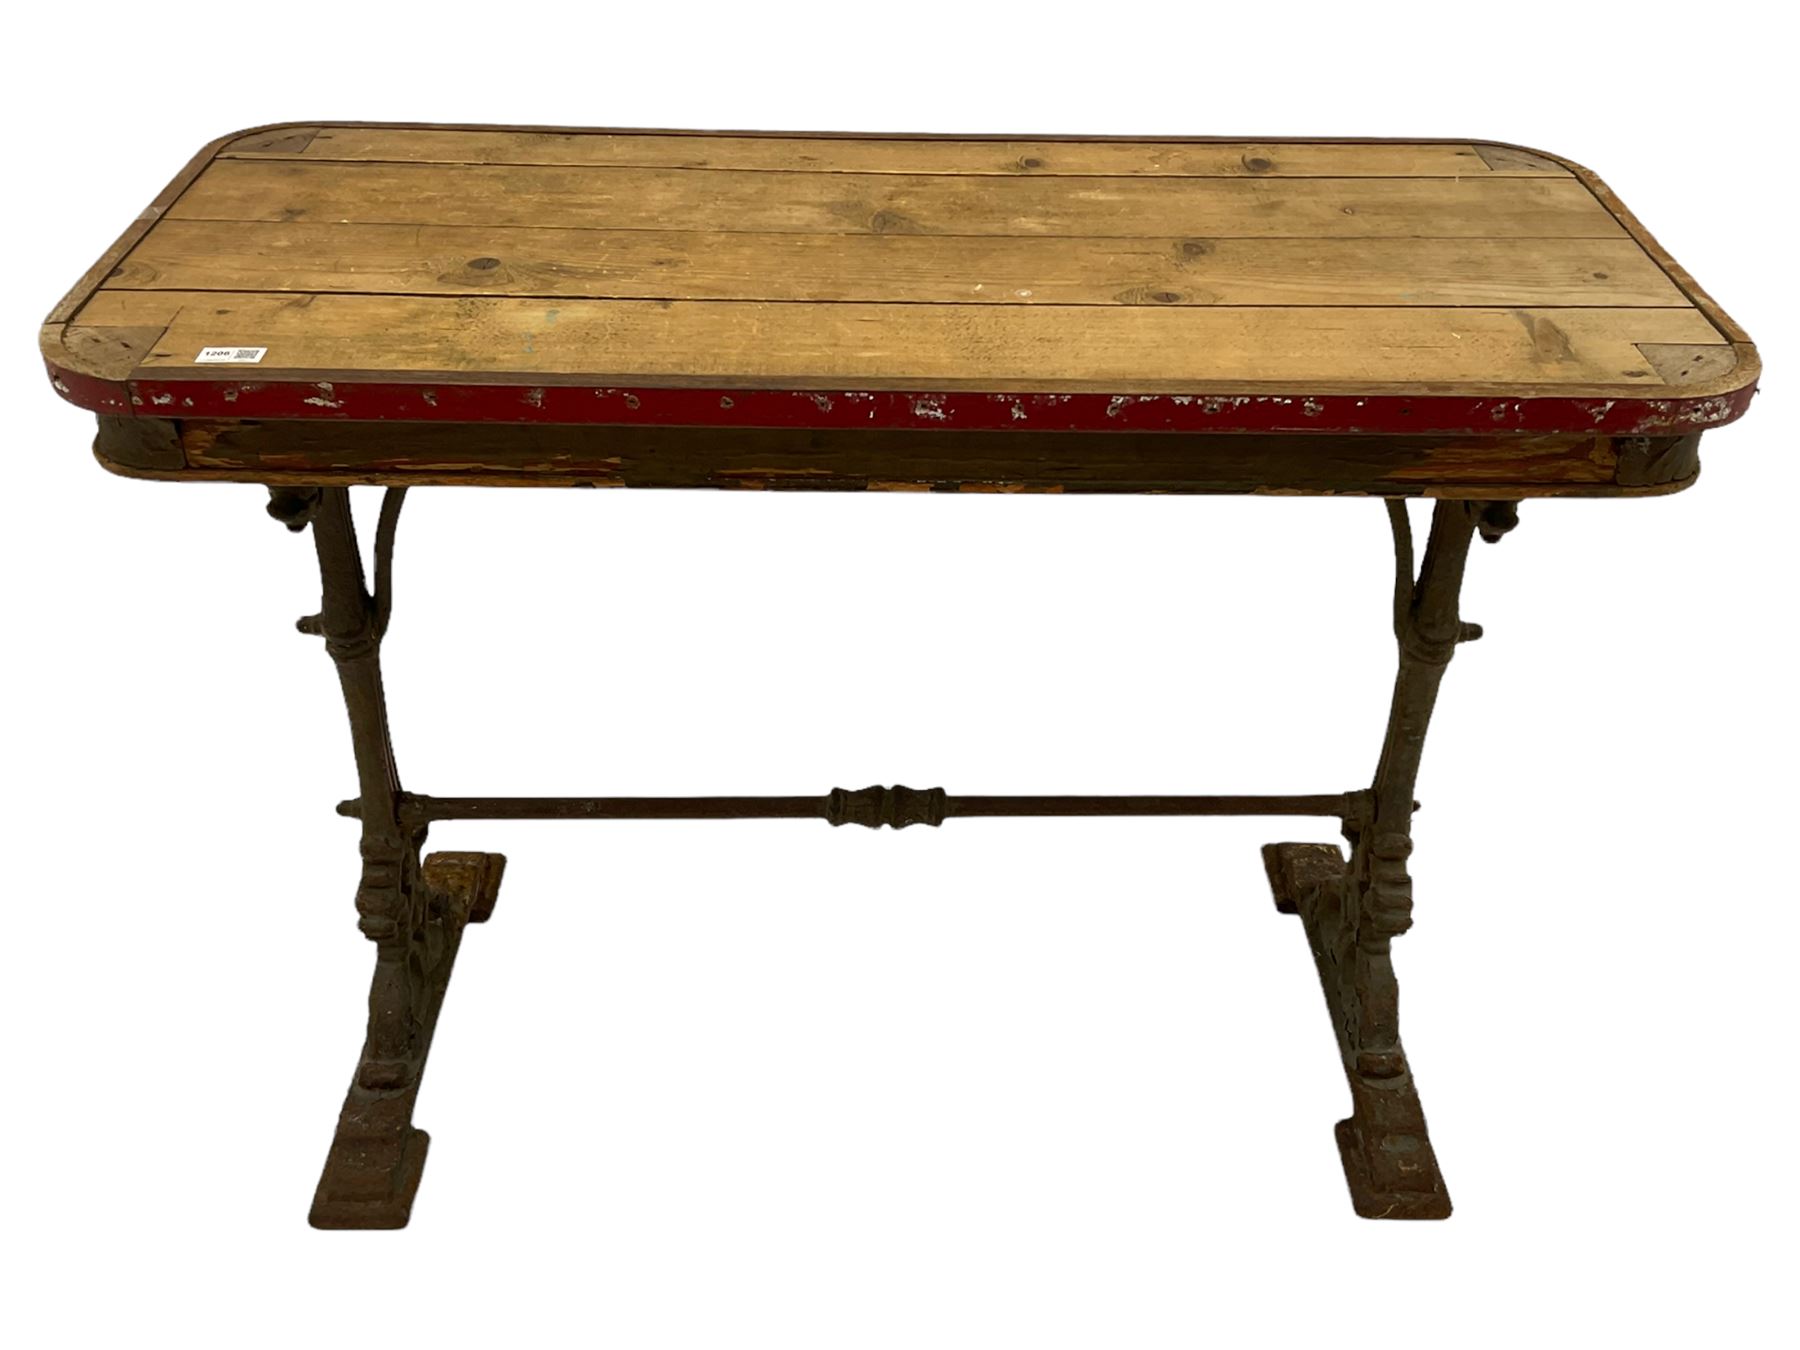 19th century Nesfield cast iron pub table base with timber top - Image 3 of 3